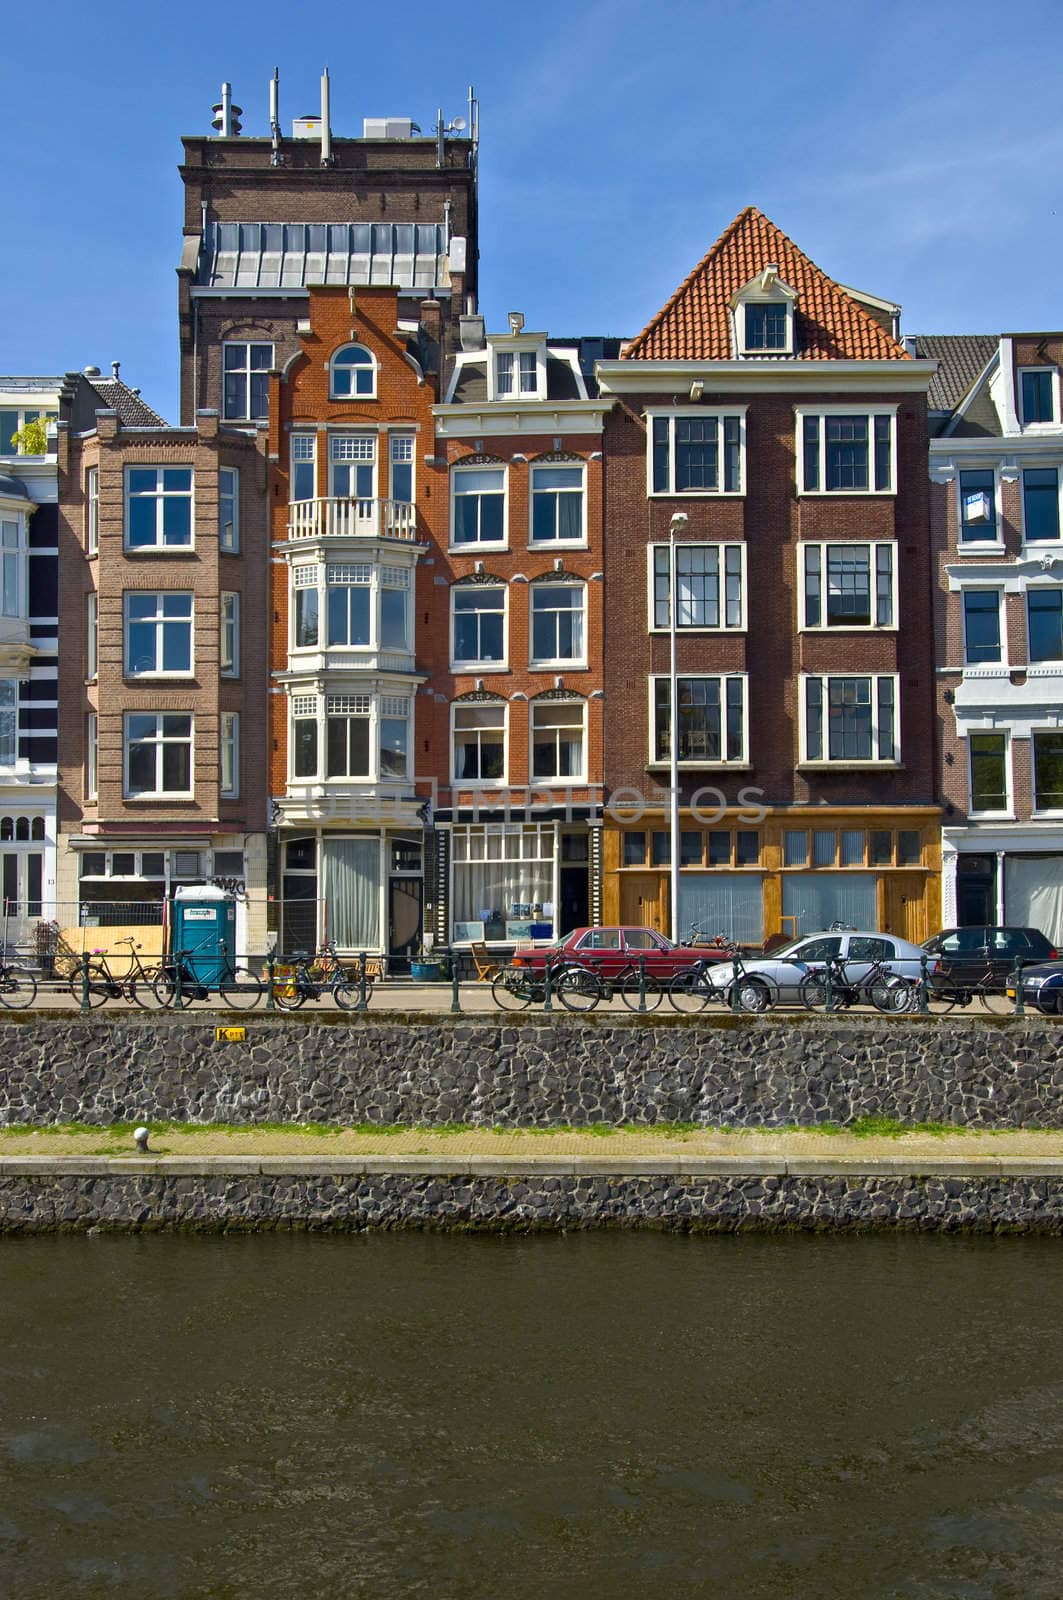 Classic amsterdam view. Residential homes on the canal. Urban scene. Spring.